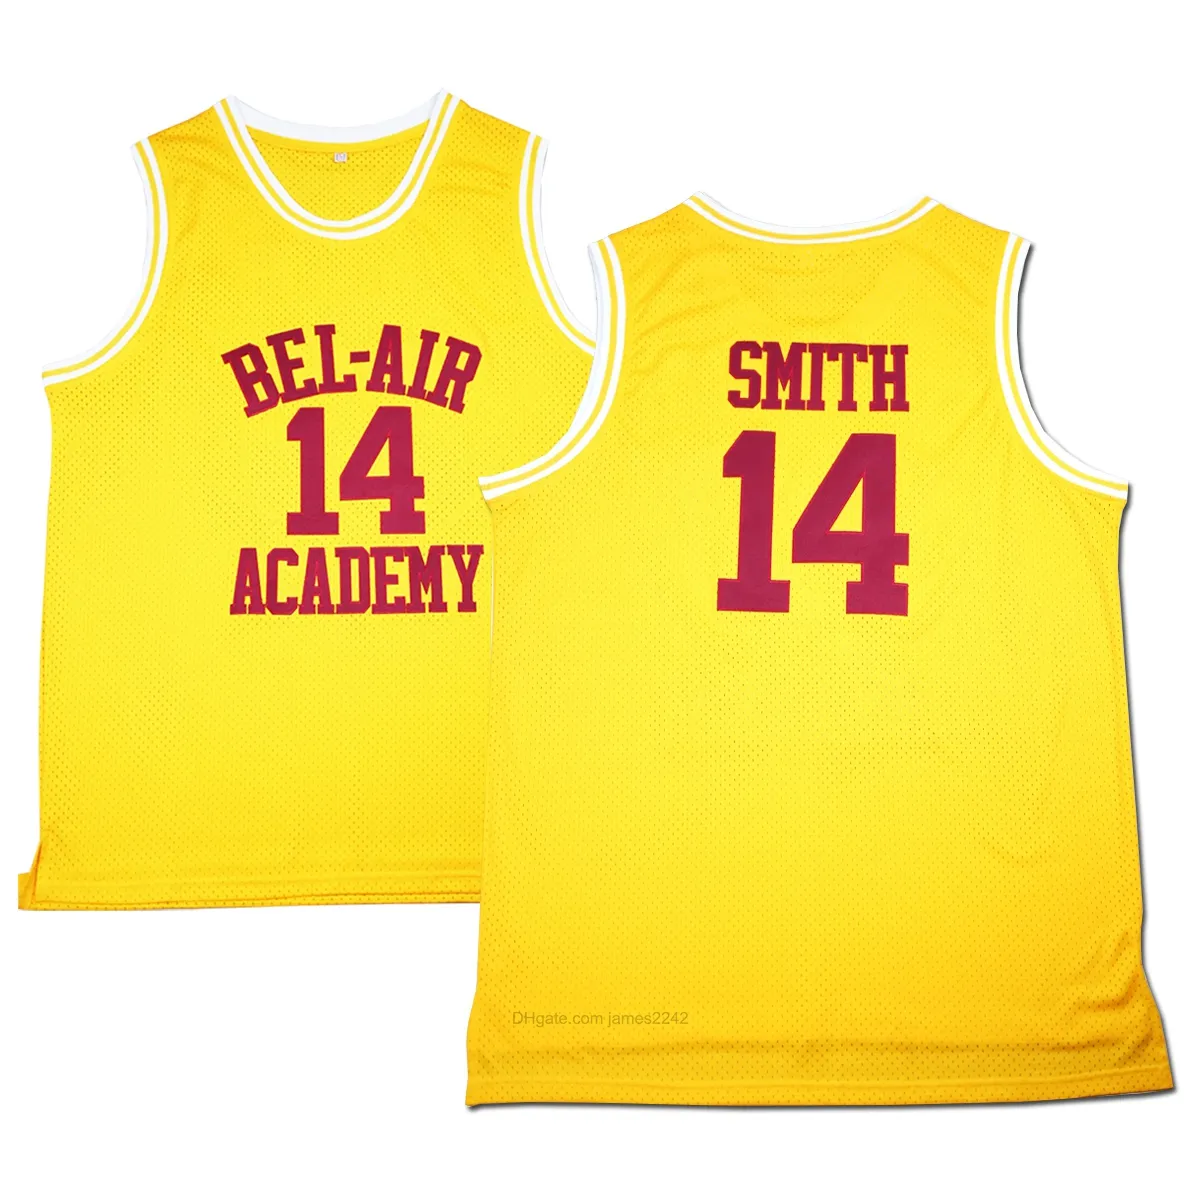 Ship From US #Movie Men's Basketball Jerseys The Fresh Prince of Bel-Air 14 Will Smith jersey Yellow Stitched Academy Size S-3XL